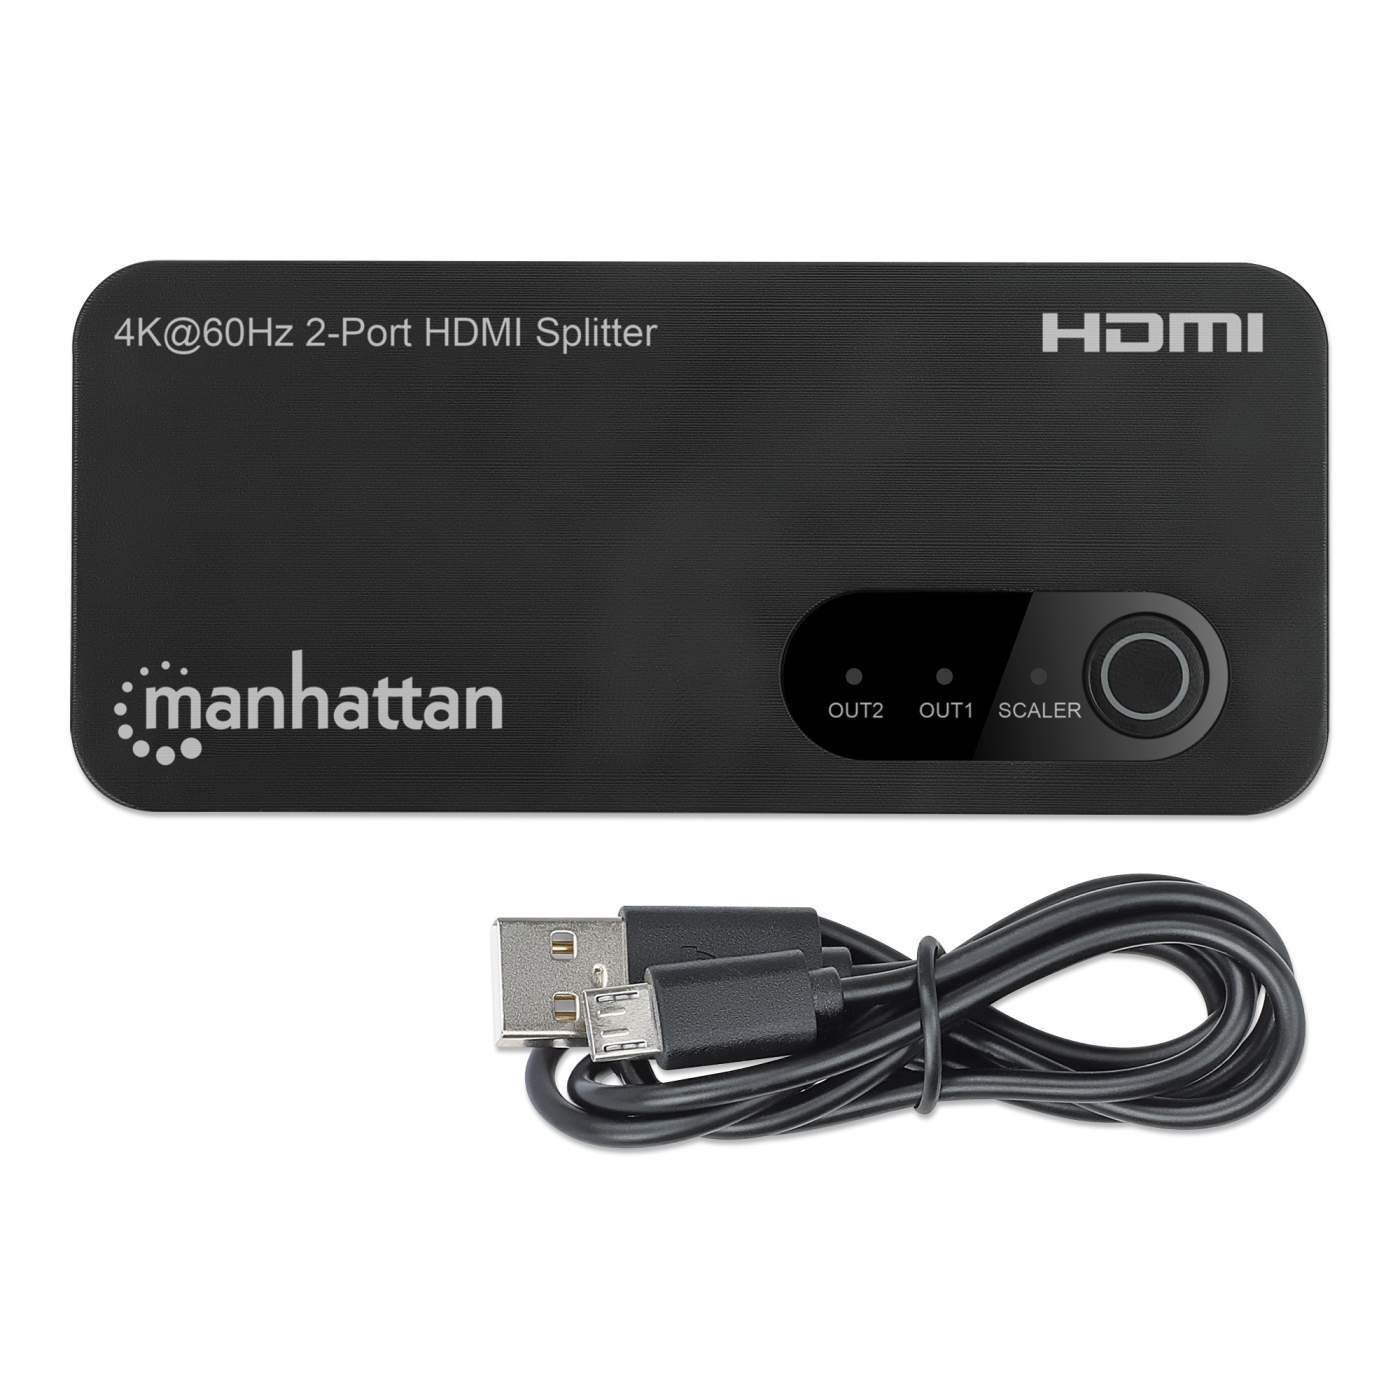 4K@60Hz 2-Port HDMI Splitter with Downscaling Image 9